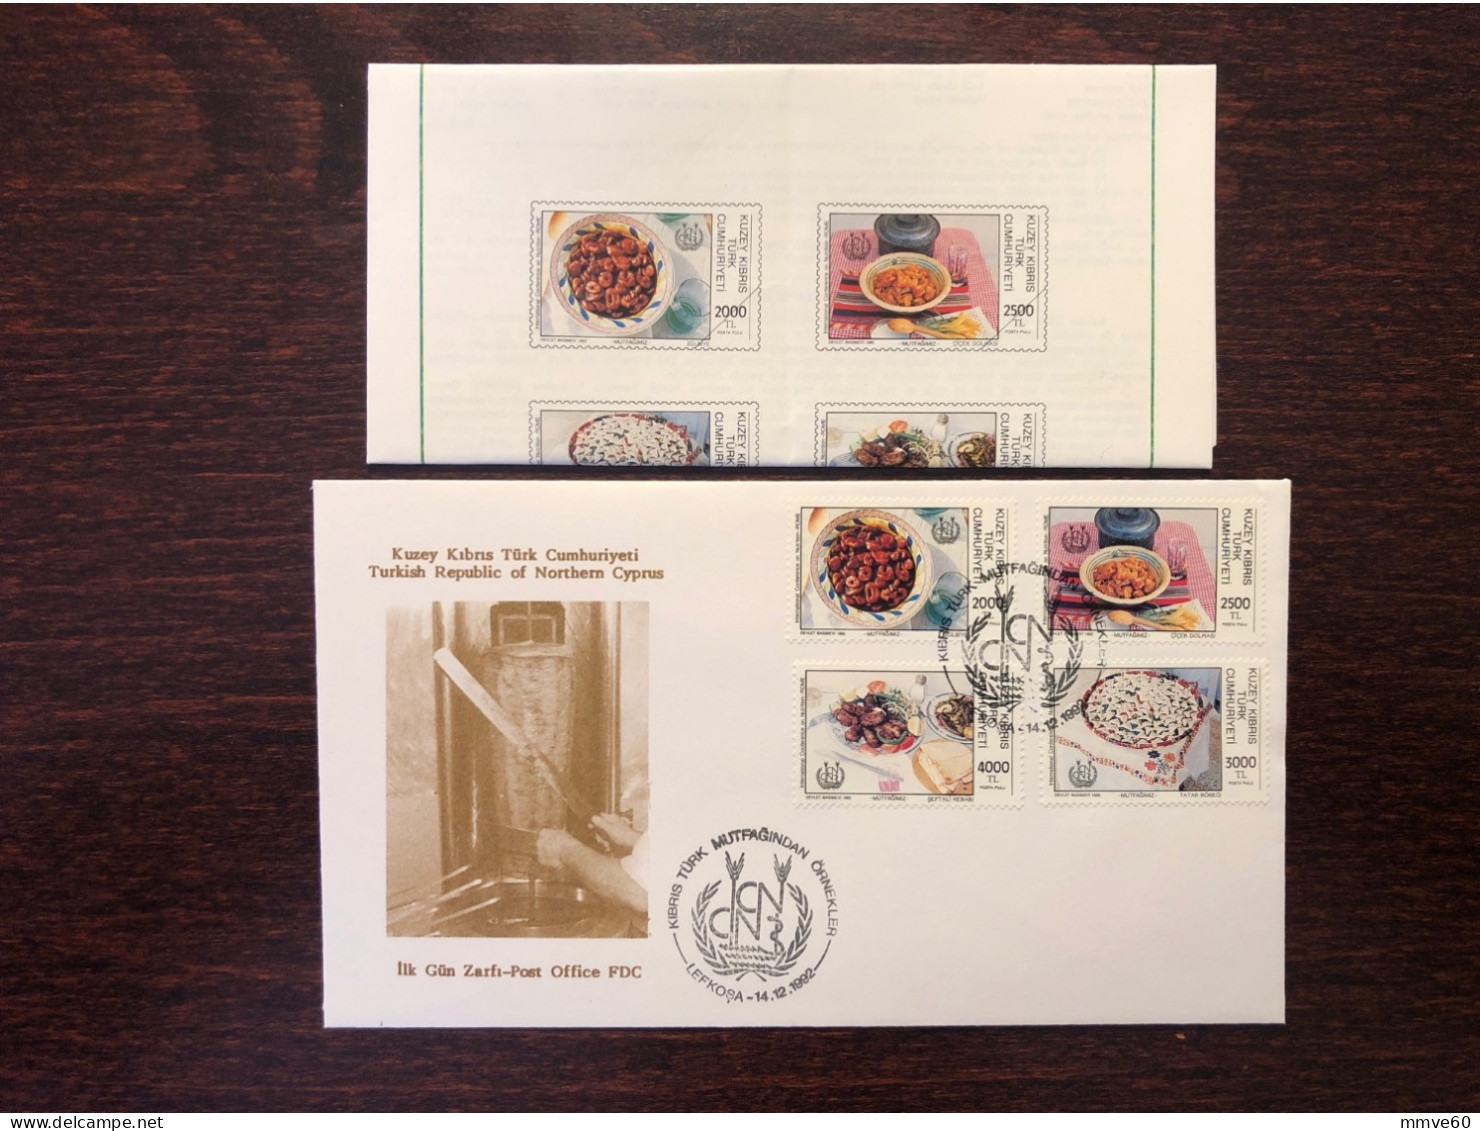 CYPRUS TURKISH FDC COVER 1992 YEAR WHO FAO NUTRITIONS HEALTH MEDICINE STAMPS - Covers & Documents